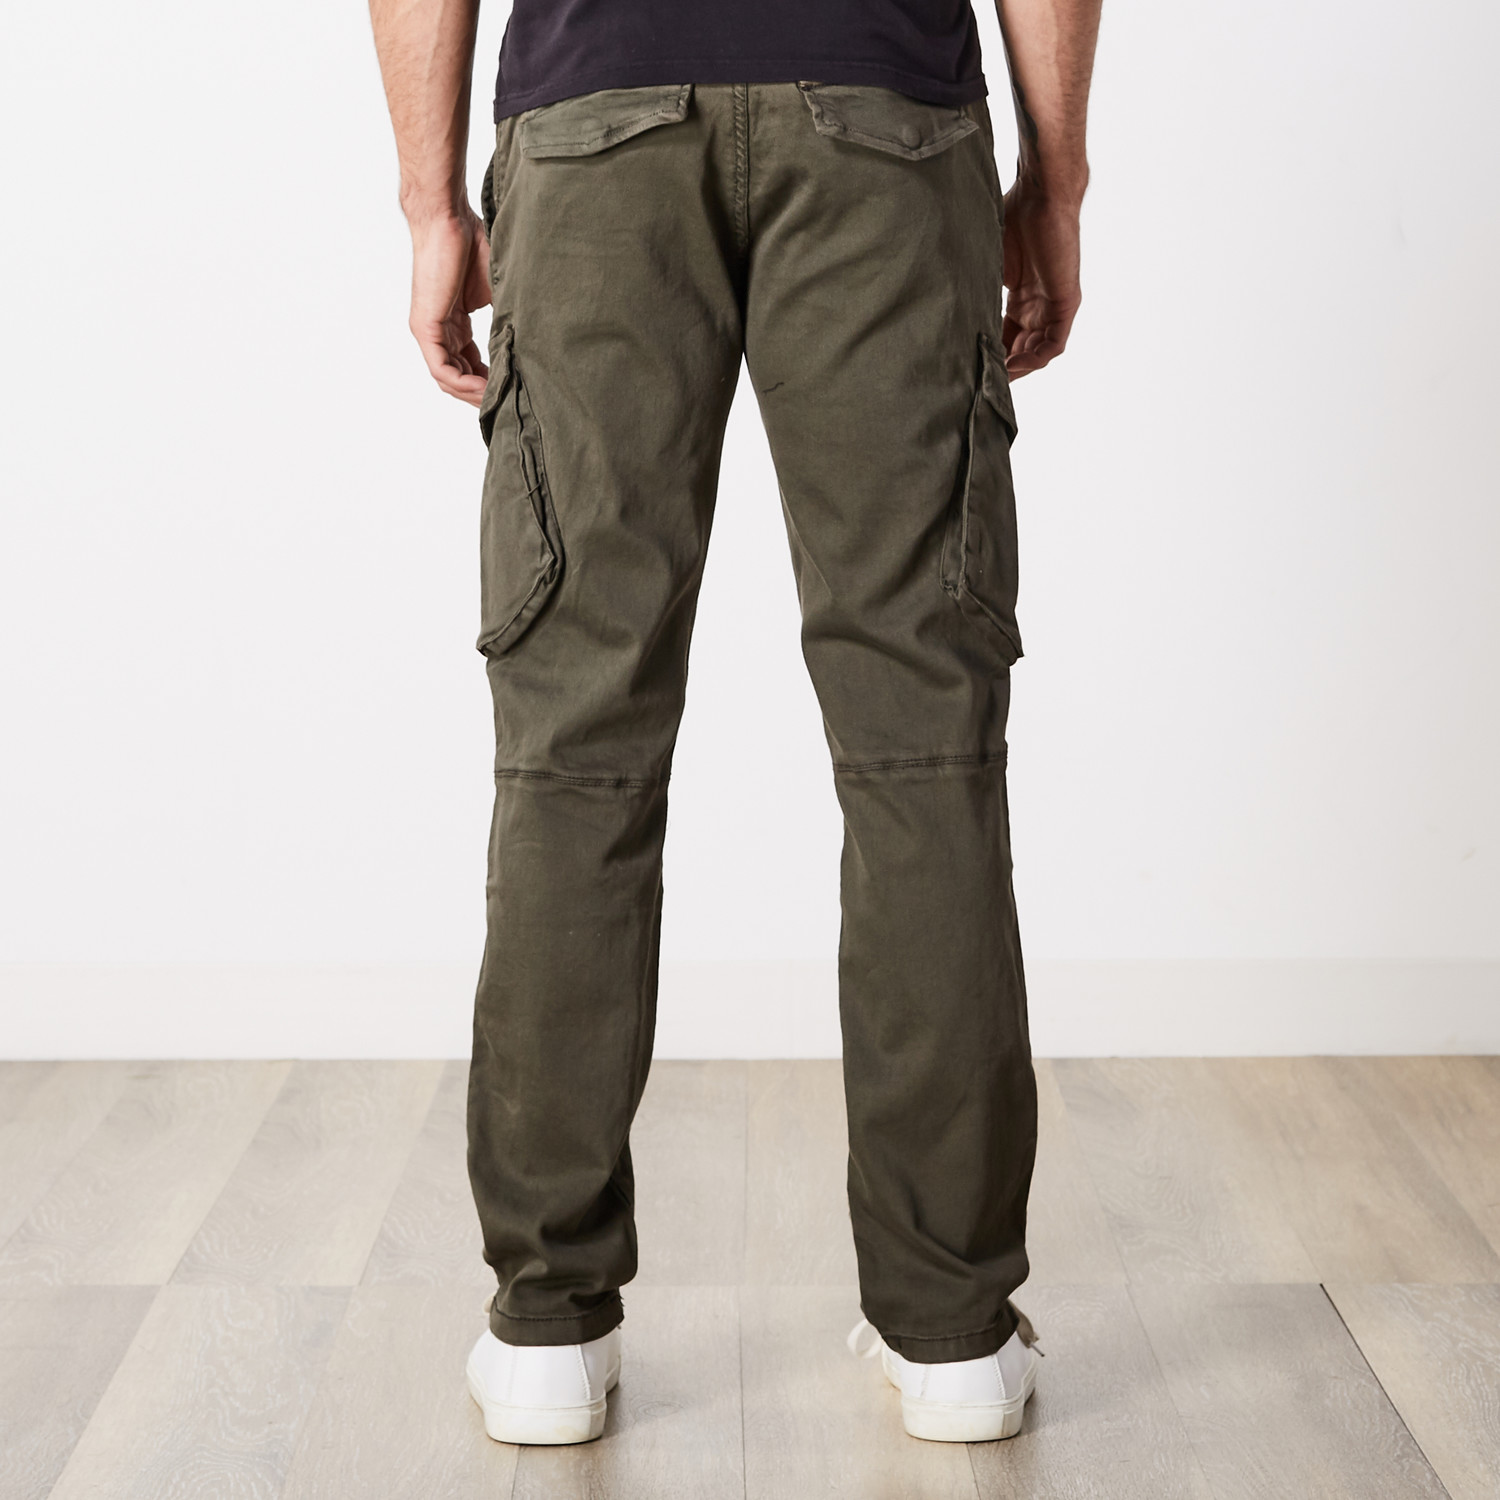 Slim Fit Cargo Pant // Olive (30WX30L) - Xray Jeans - Touch of Modern